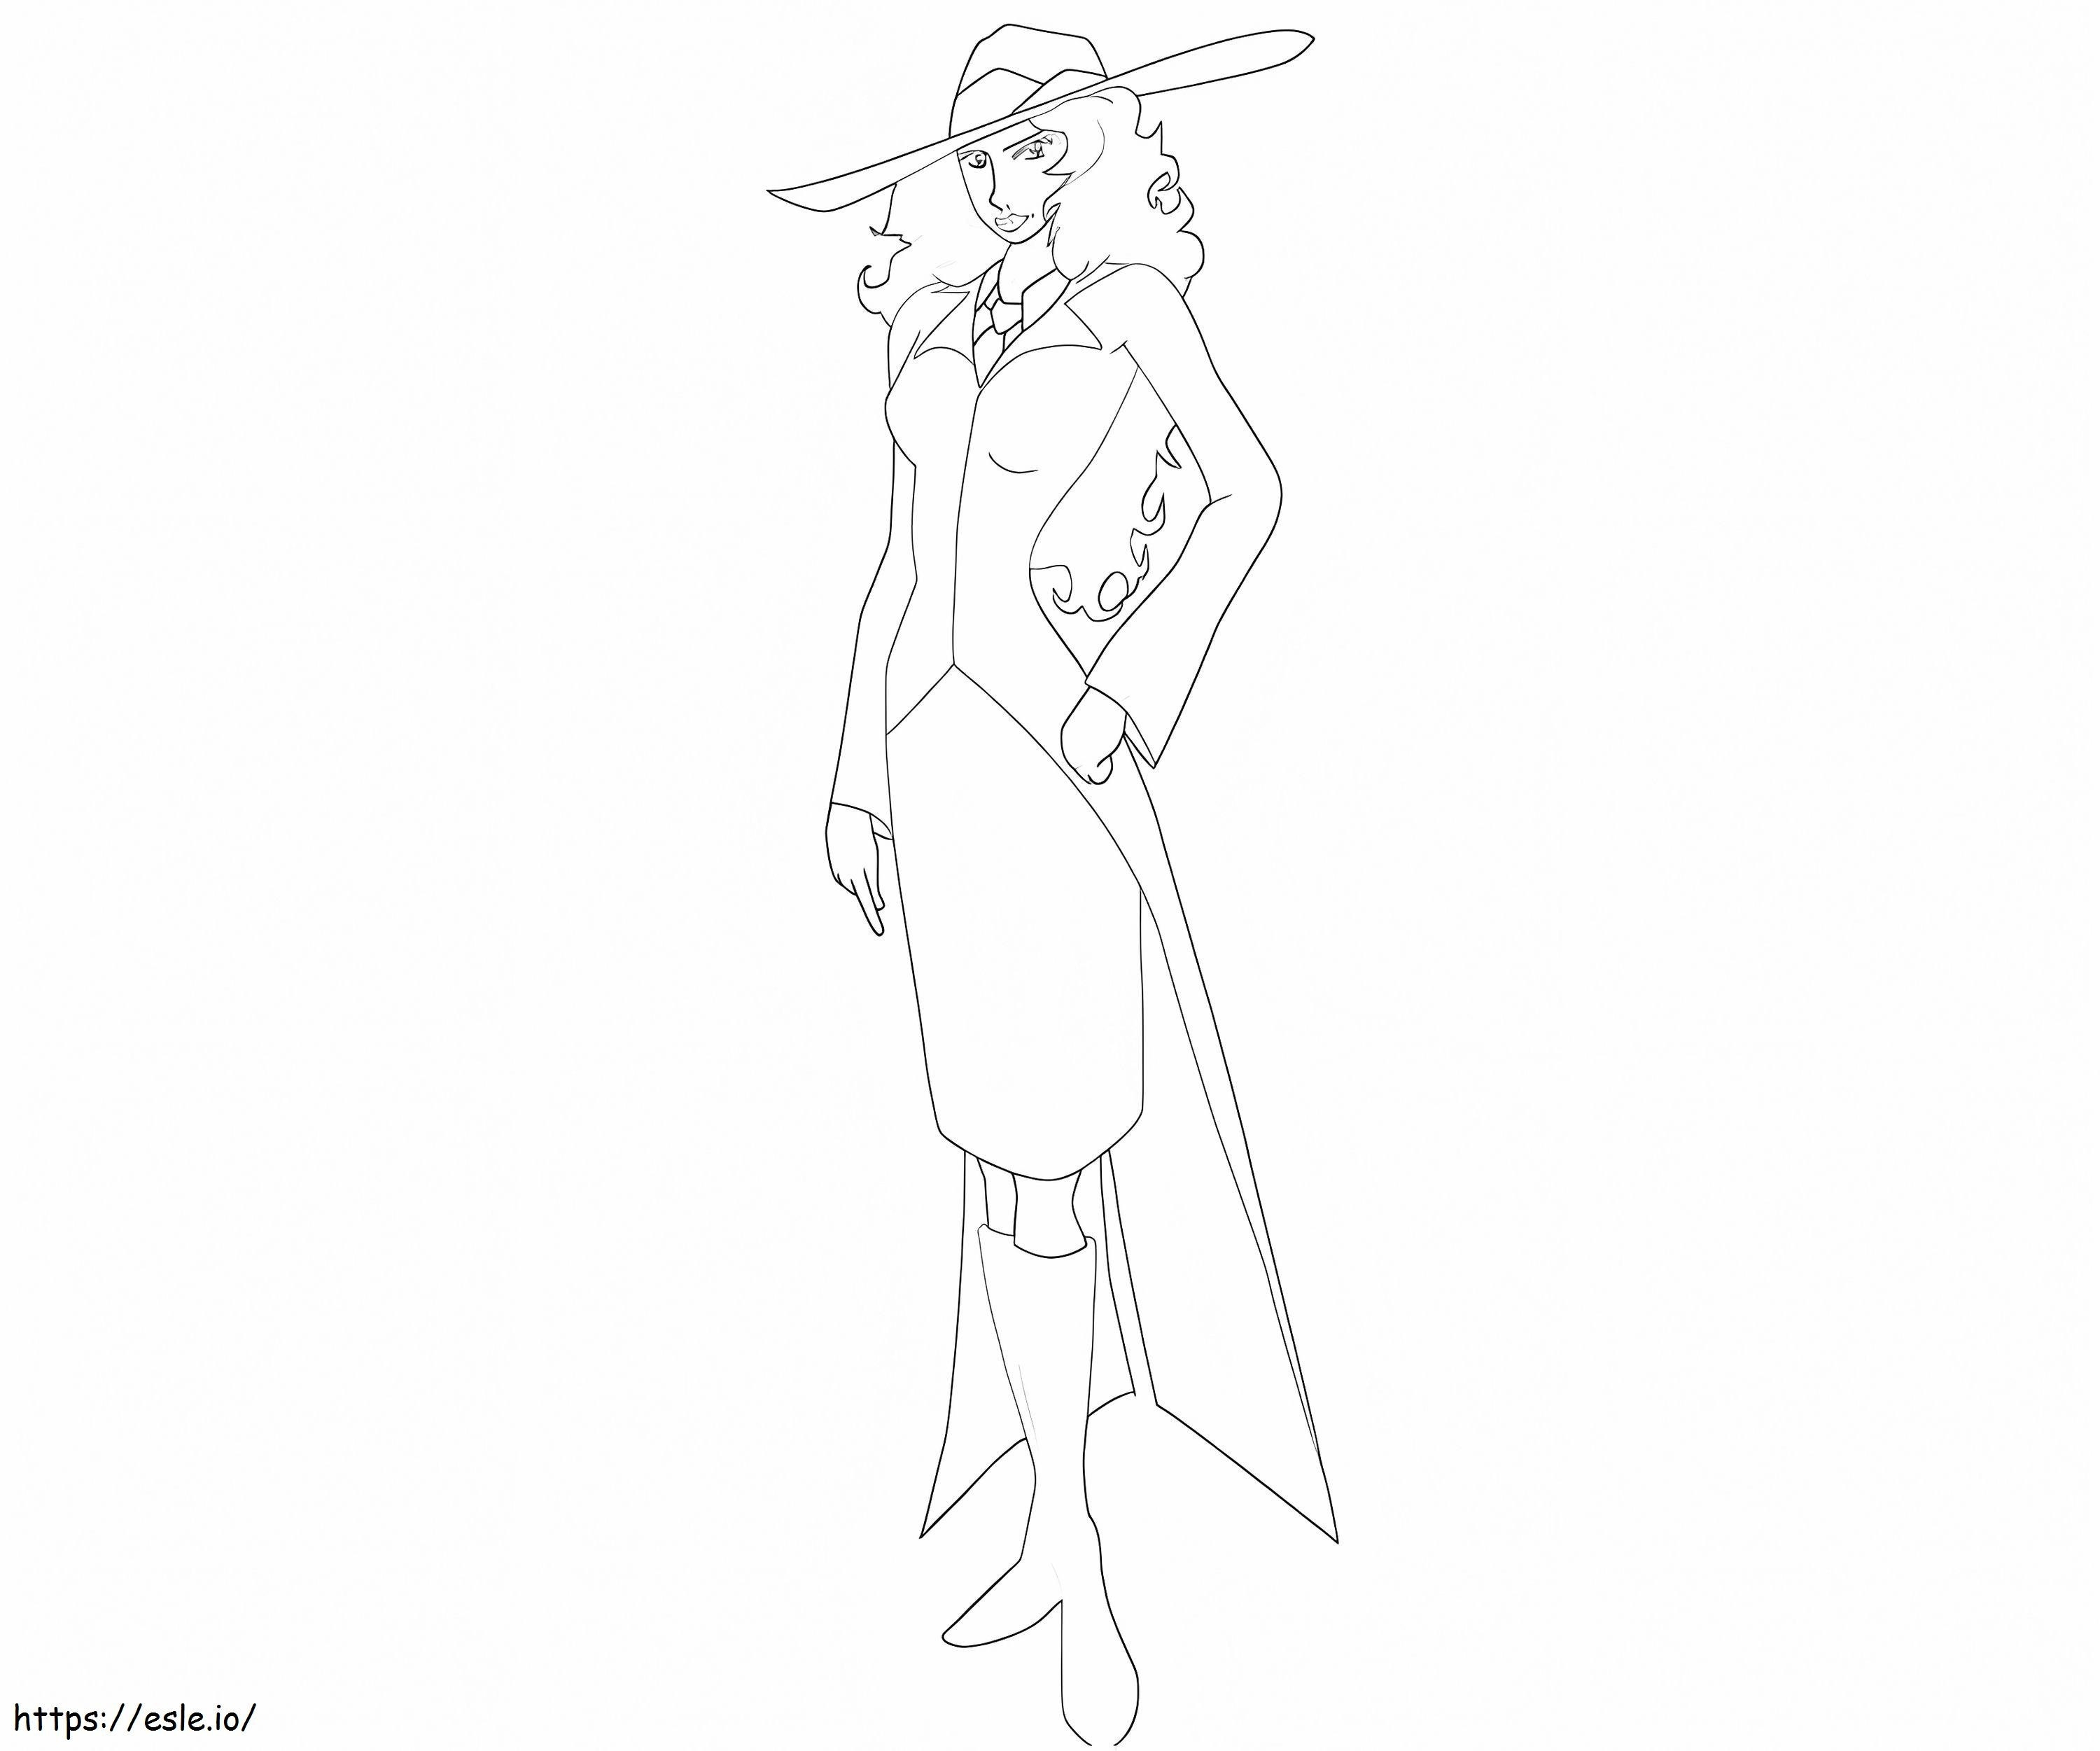 Carmen Sandiego - The Best Of Carmen Sandiego coloring page